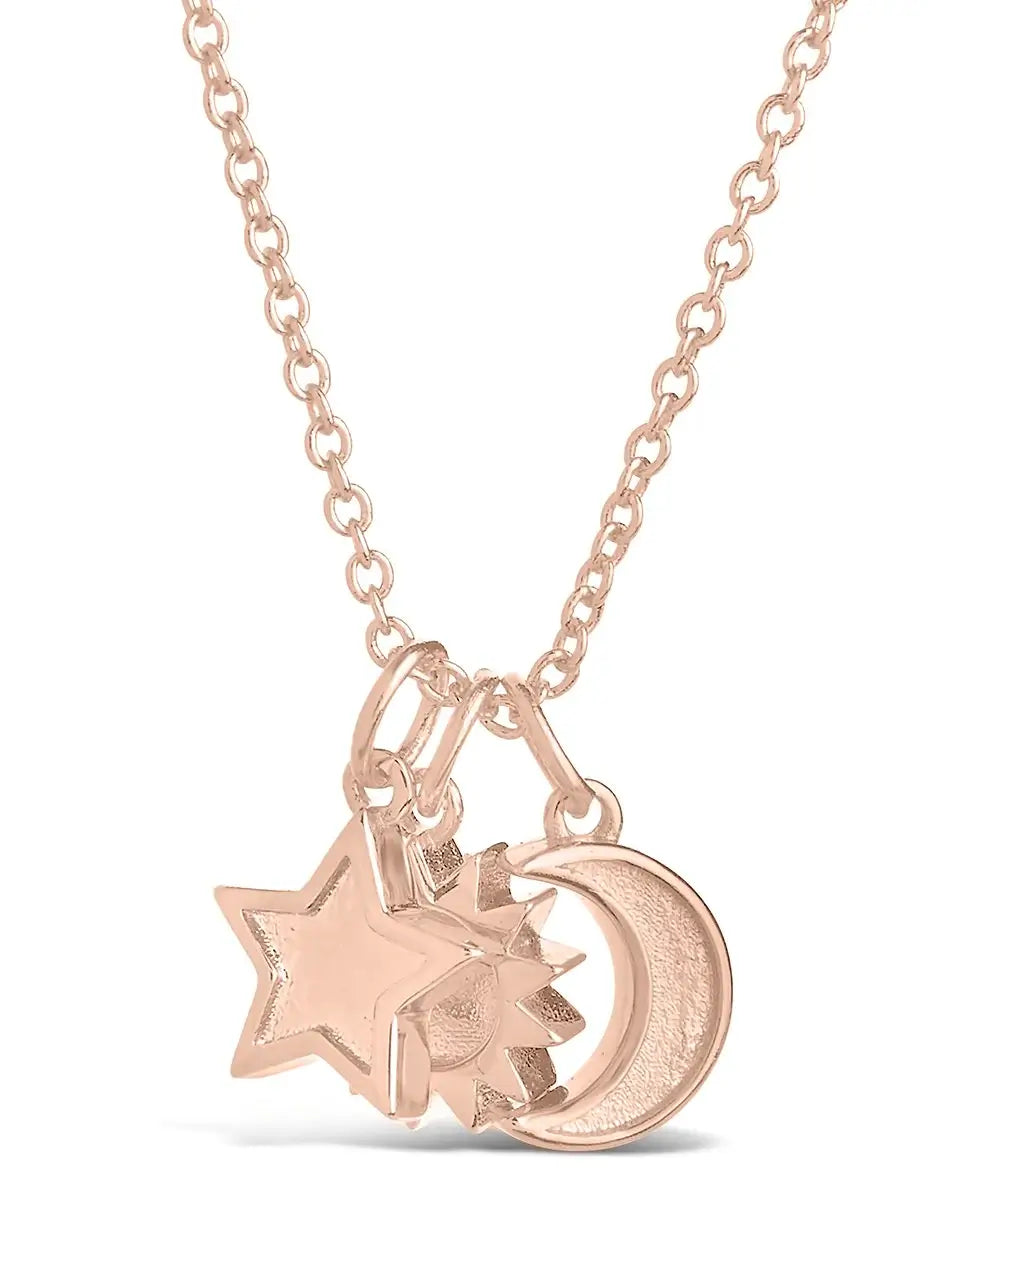 Sun Moon and Stars Necklace - Becoming Jewelry